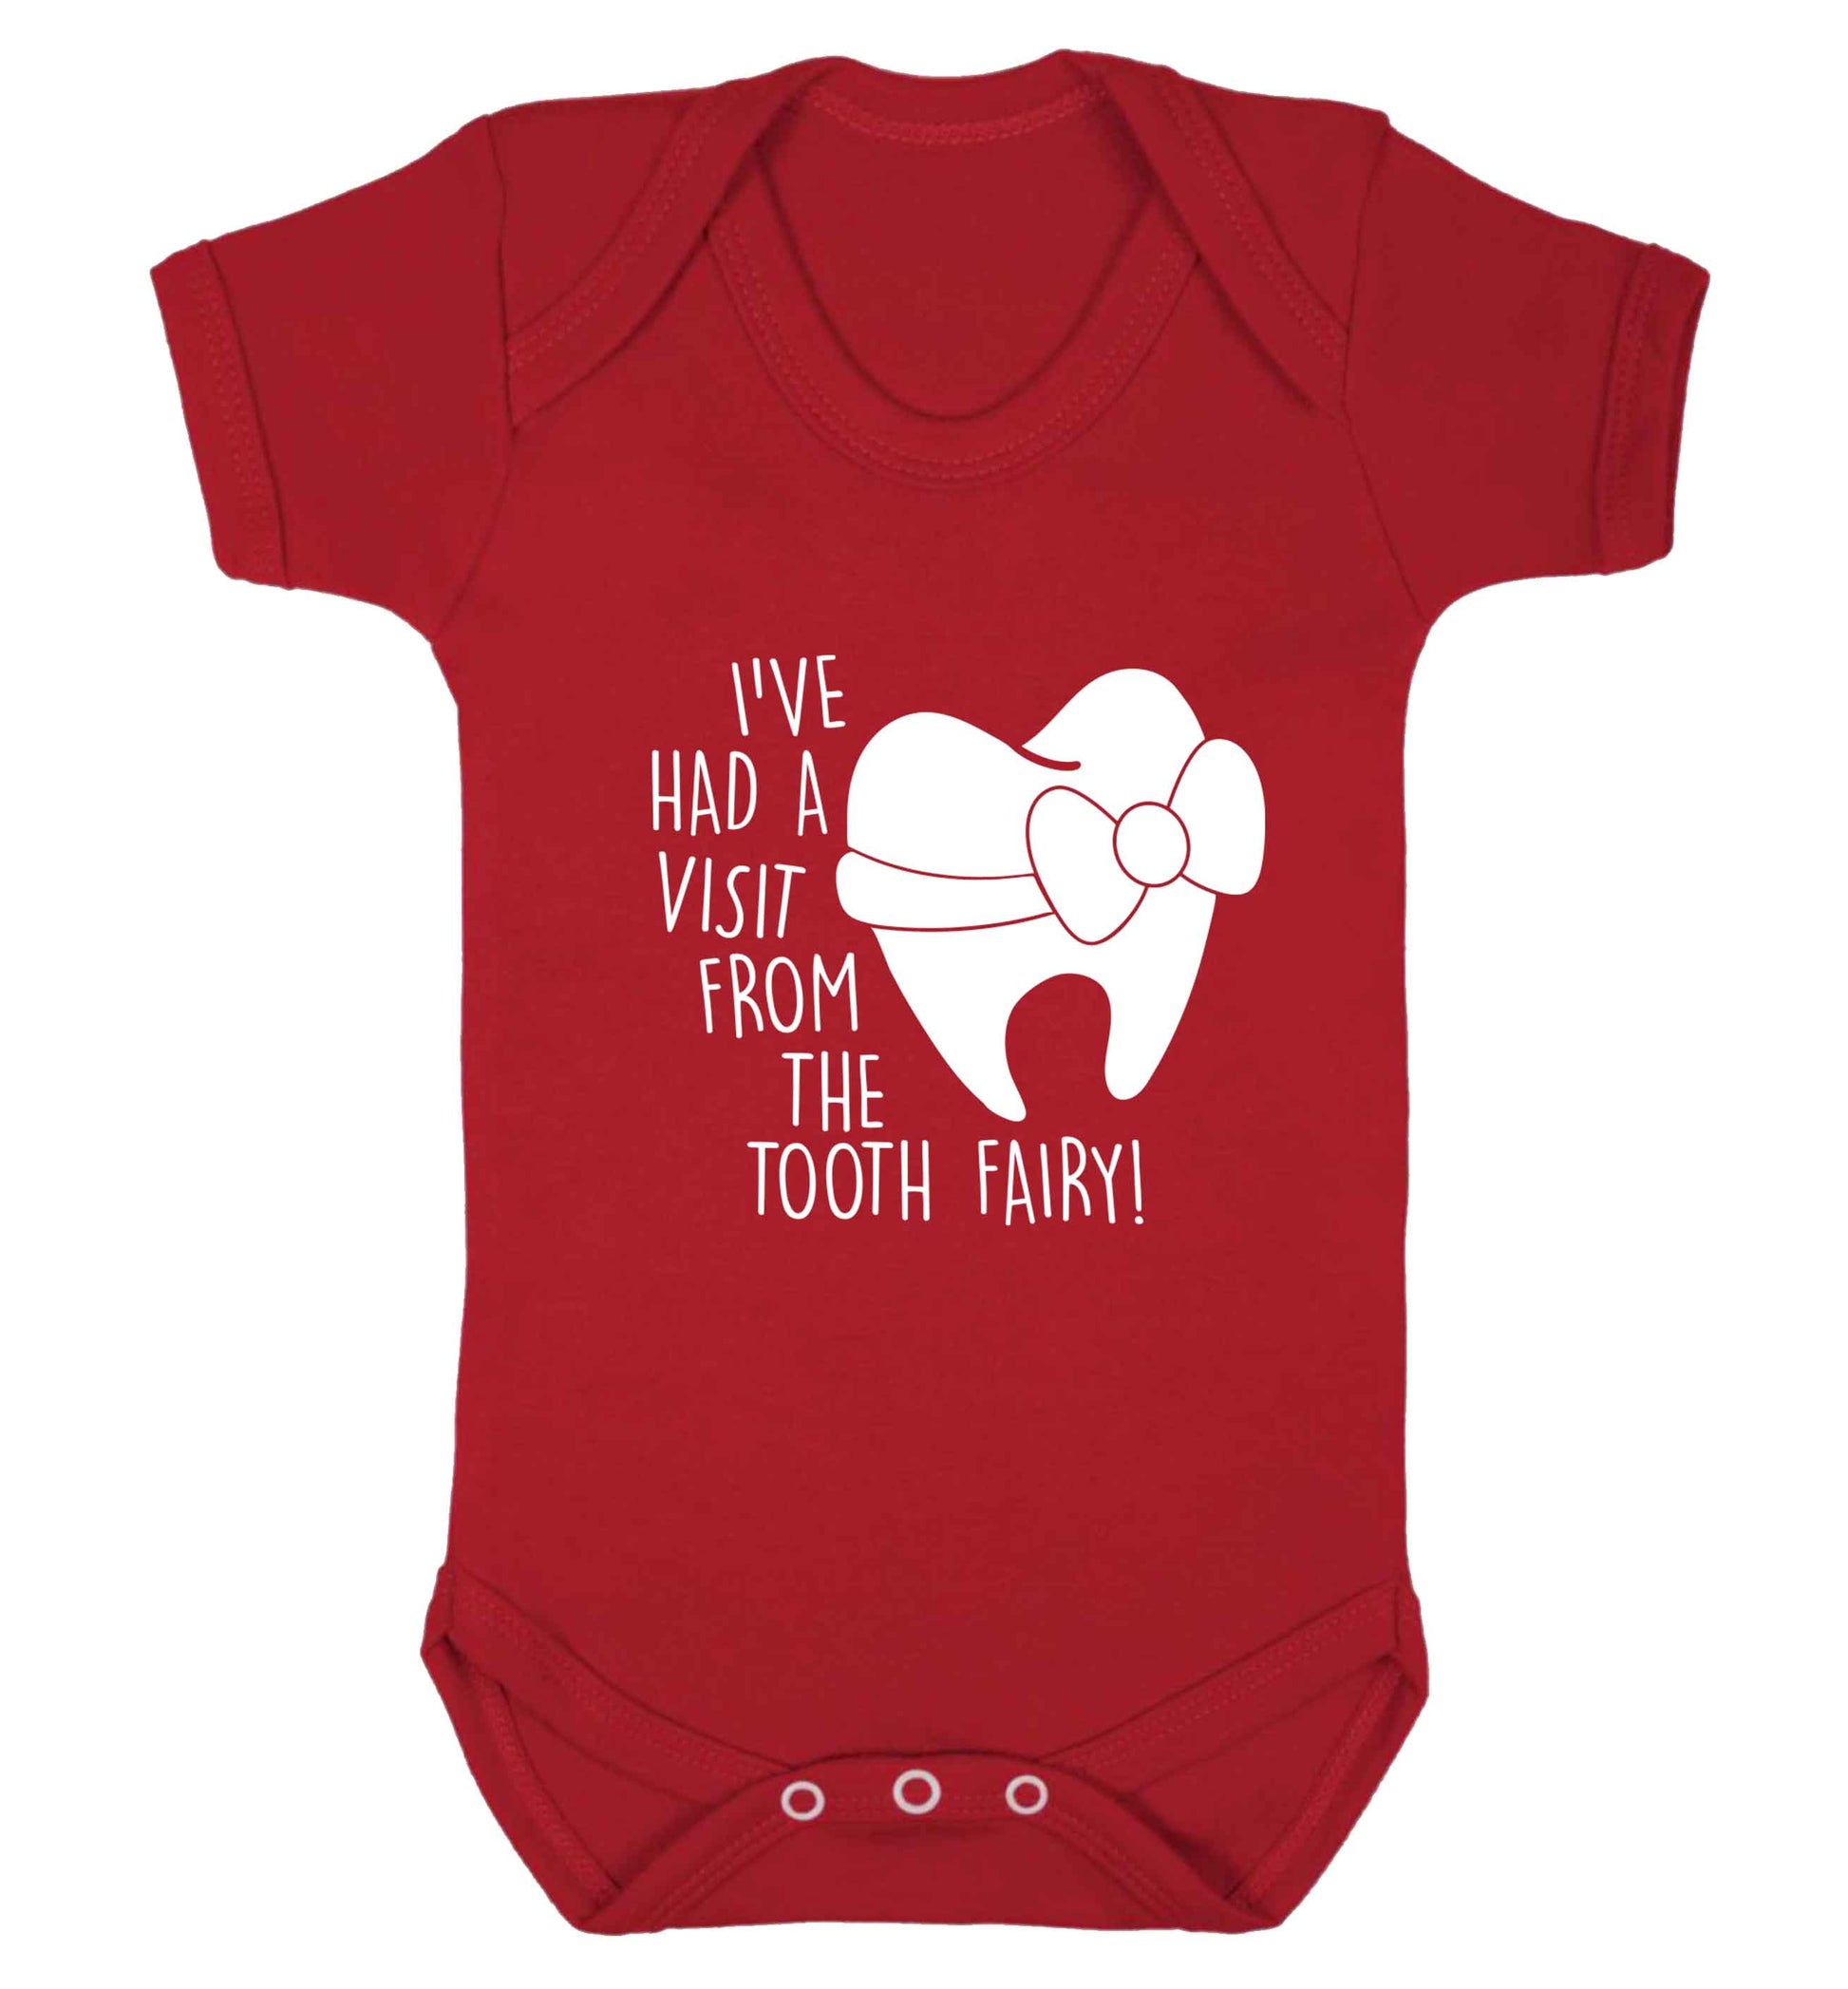 Visit From Tooth Fairy baby vest red 18-24 months